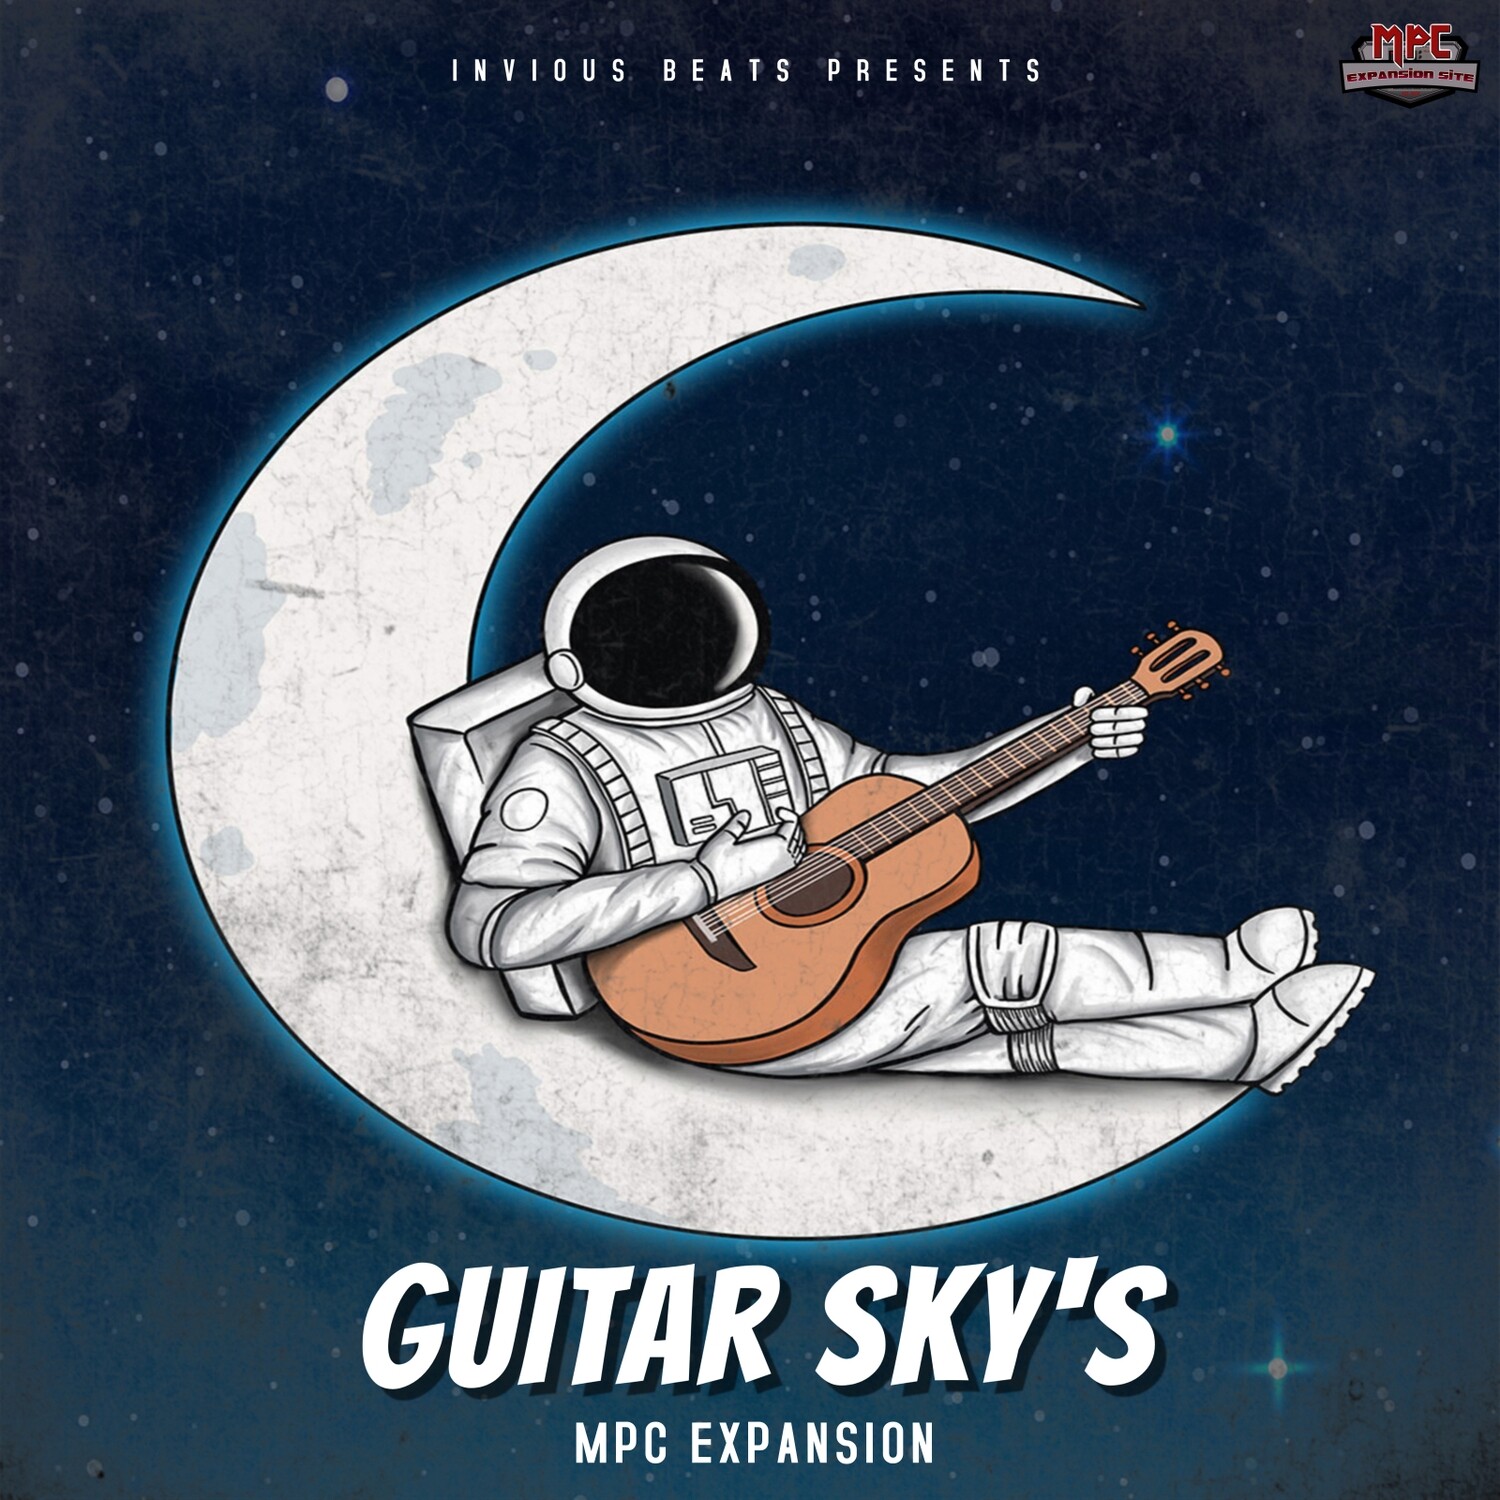 MPC EXPANSION 'GUITAR SKYS' by INVIOUS